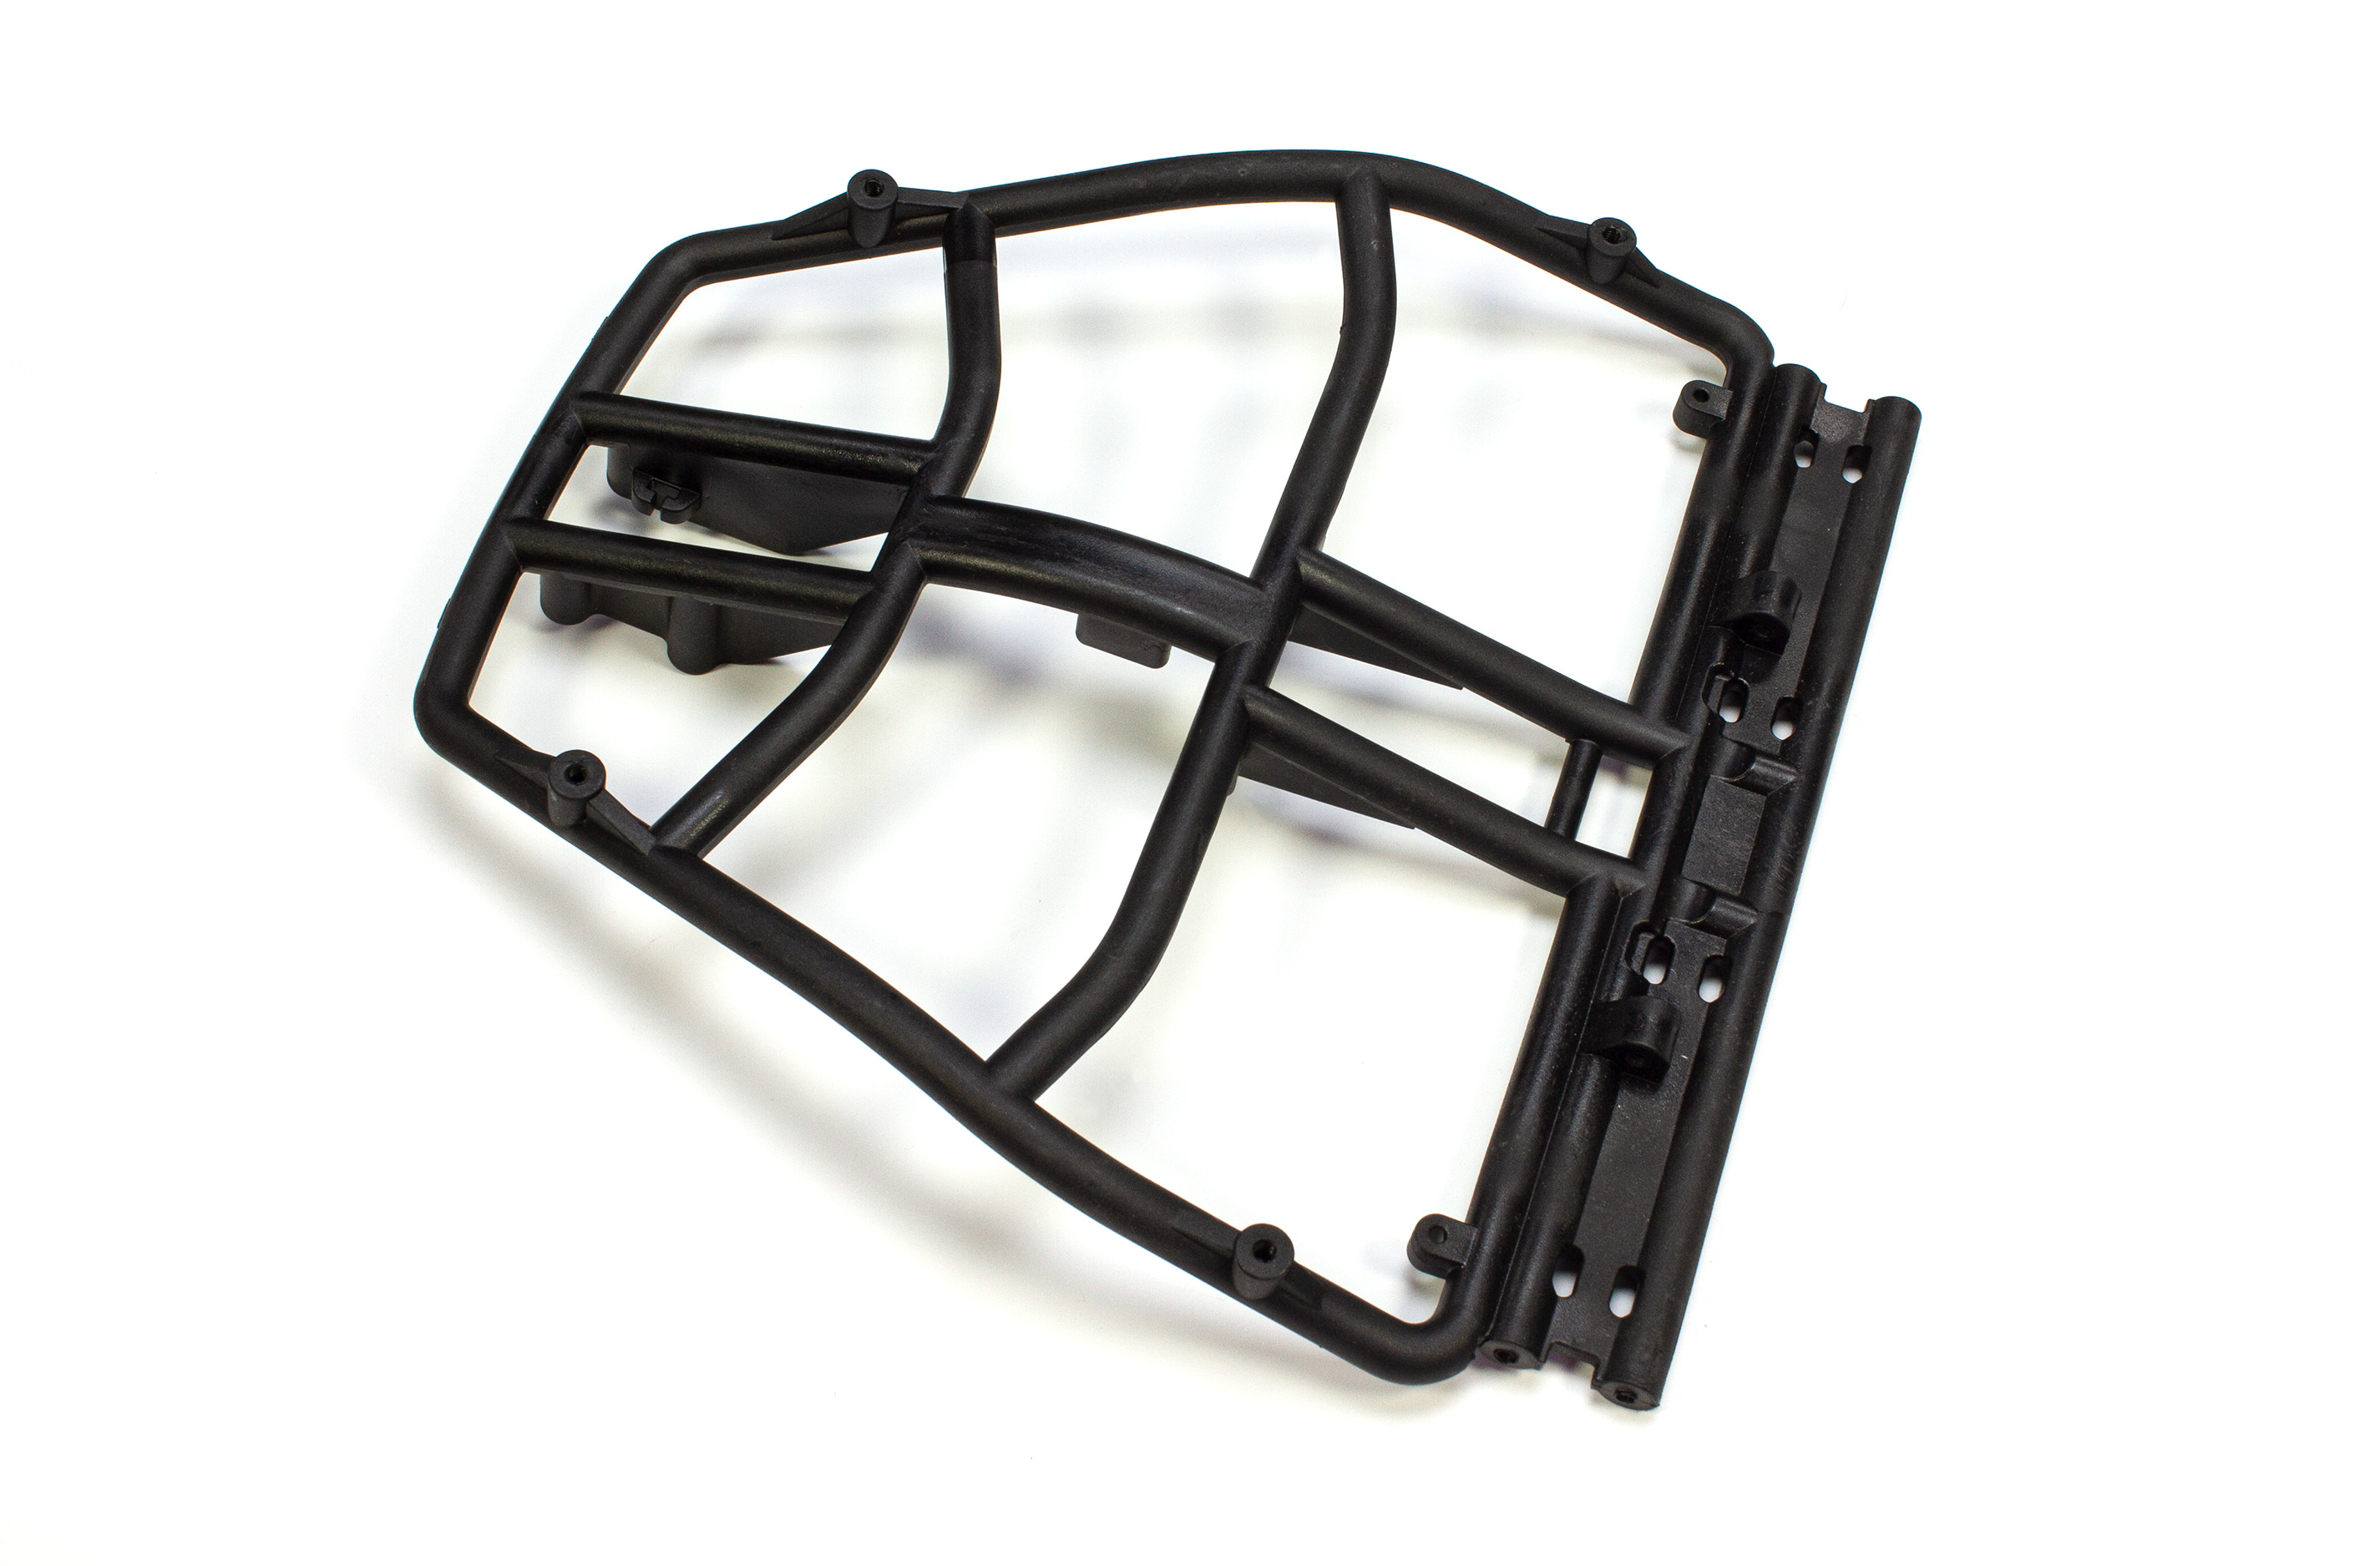 R122 UFRC Cage front section